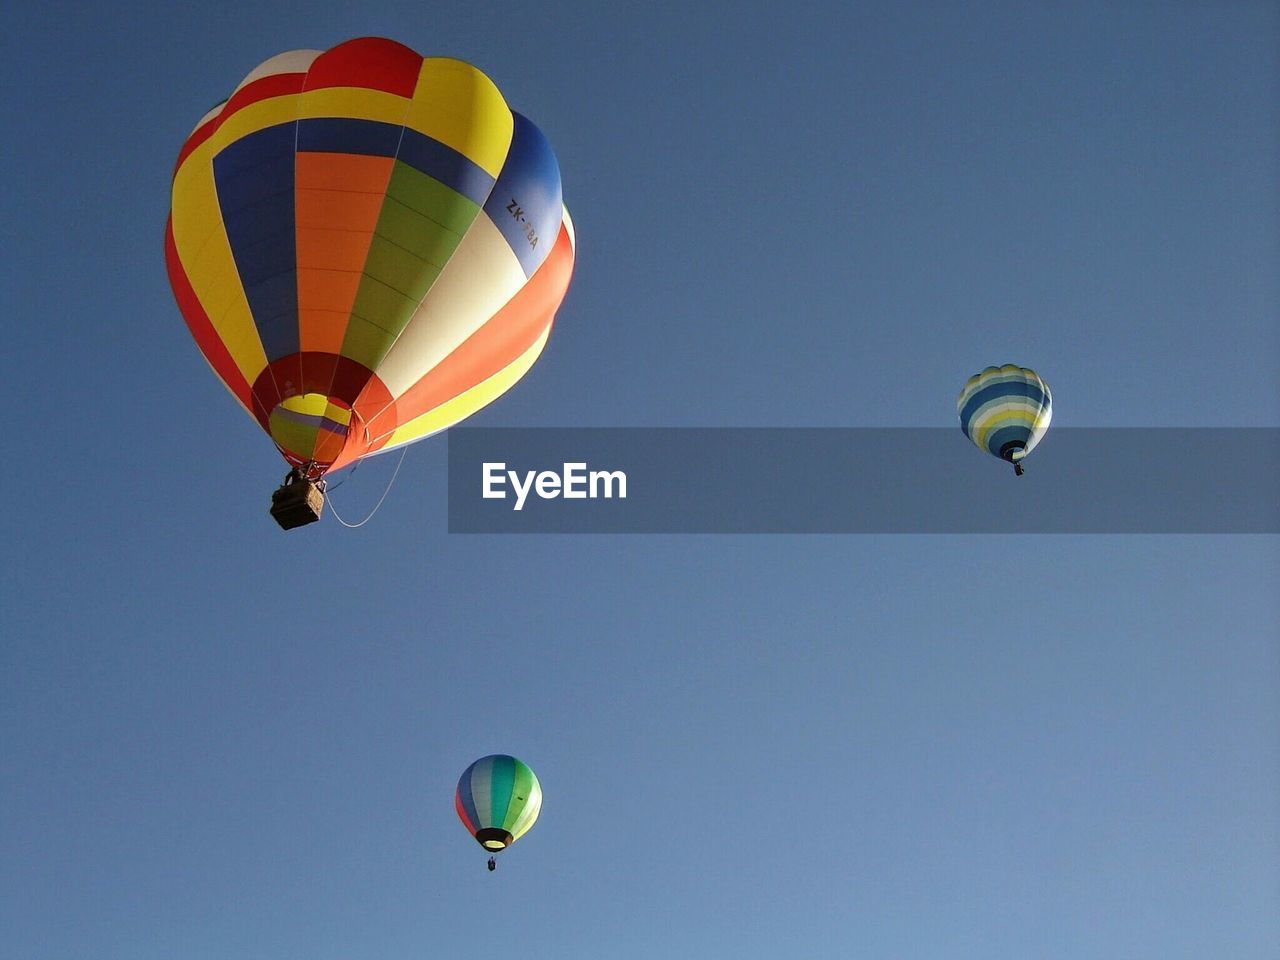 Low angle view of hot air balloons in clear blue sky